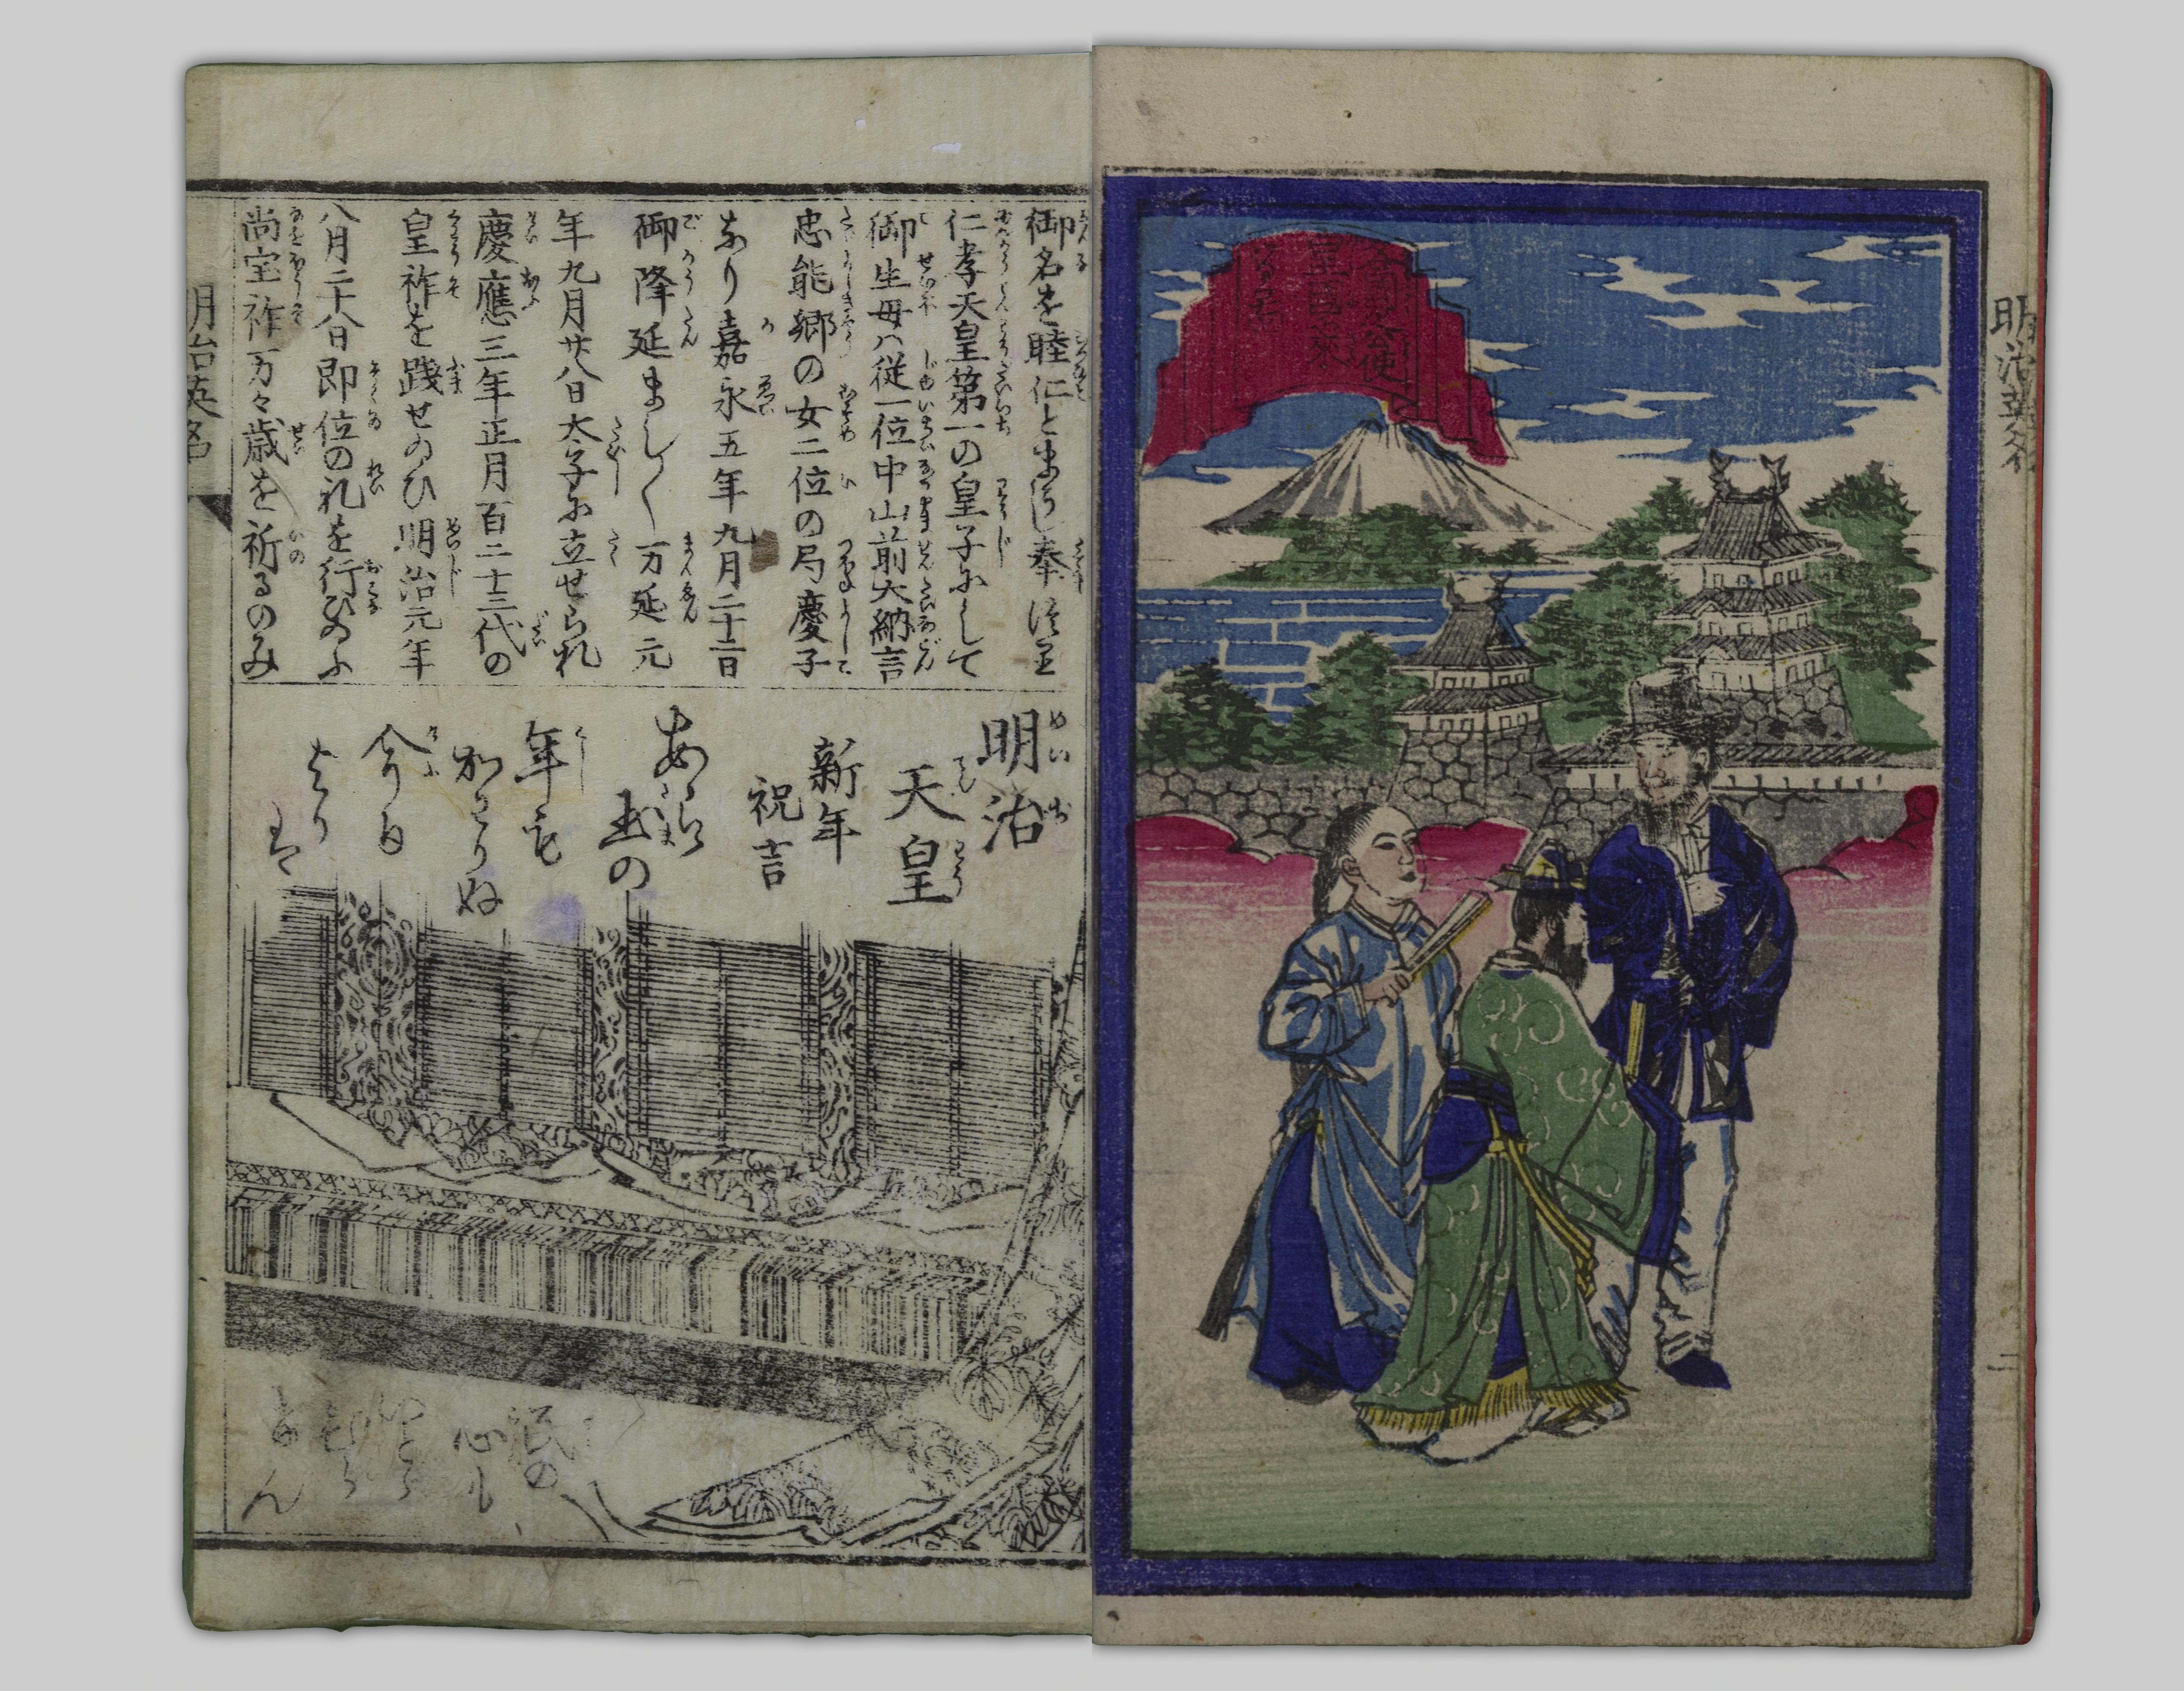 An illustration from Meiji Eimei Hyaku’ei Sen depicting the ambassadors of China, Korea, and a western country making their way to court. Mt. Fuji and the imperial palace are in the background.